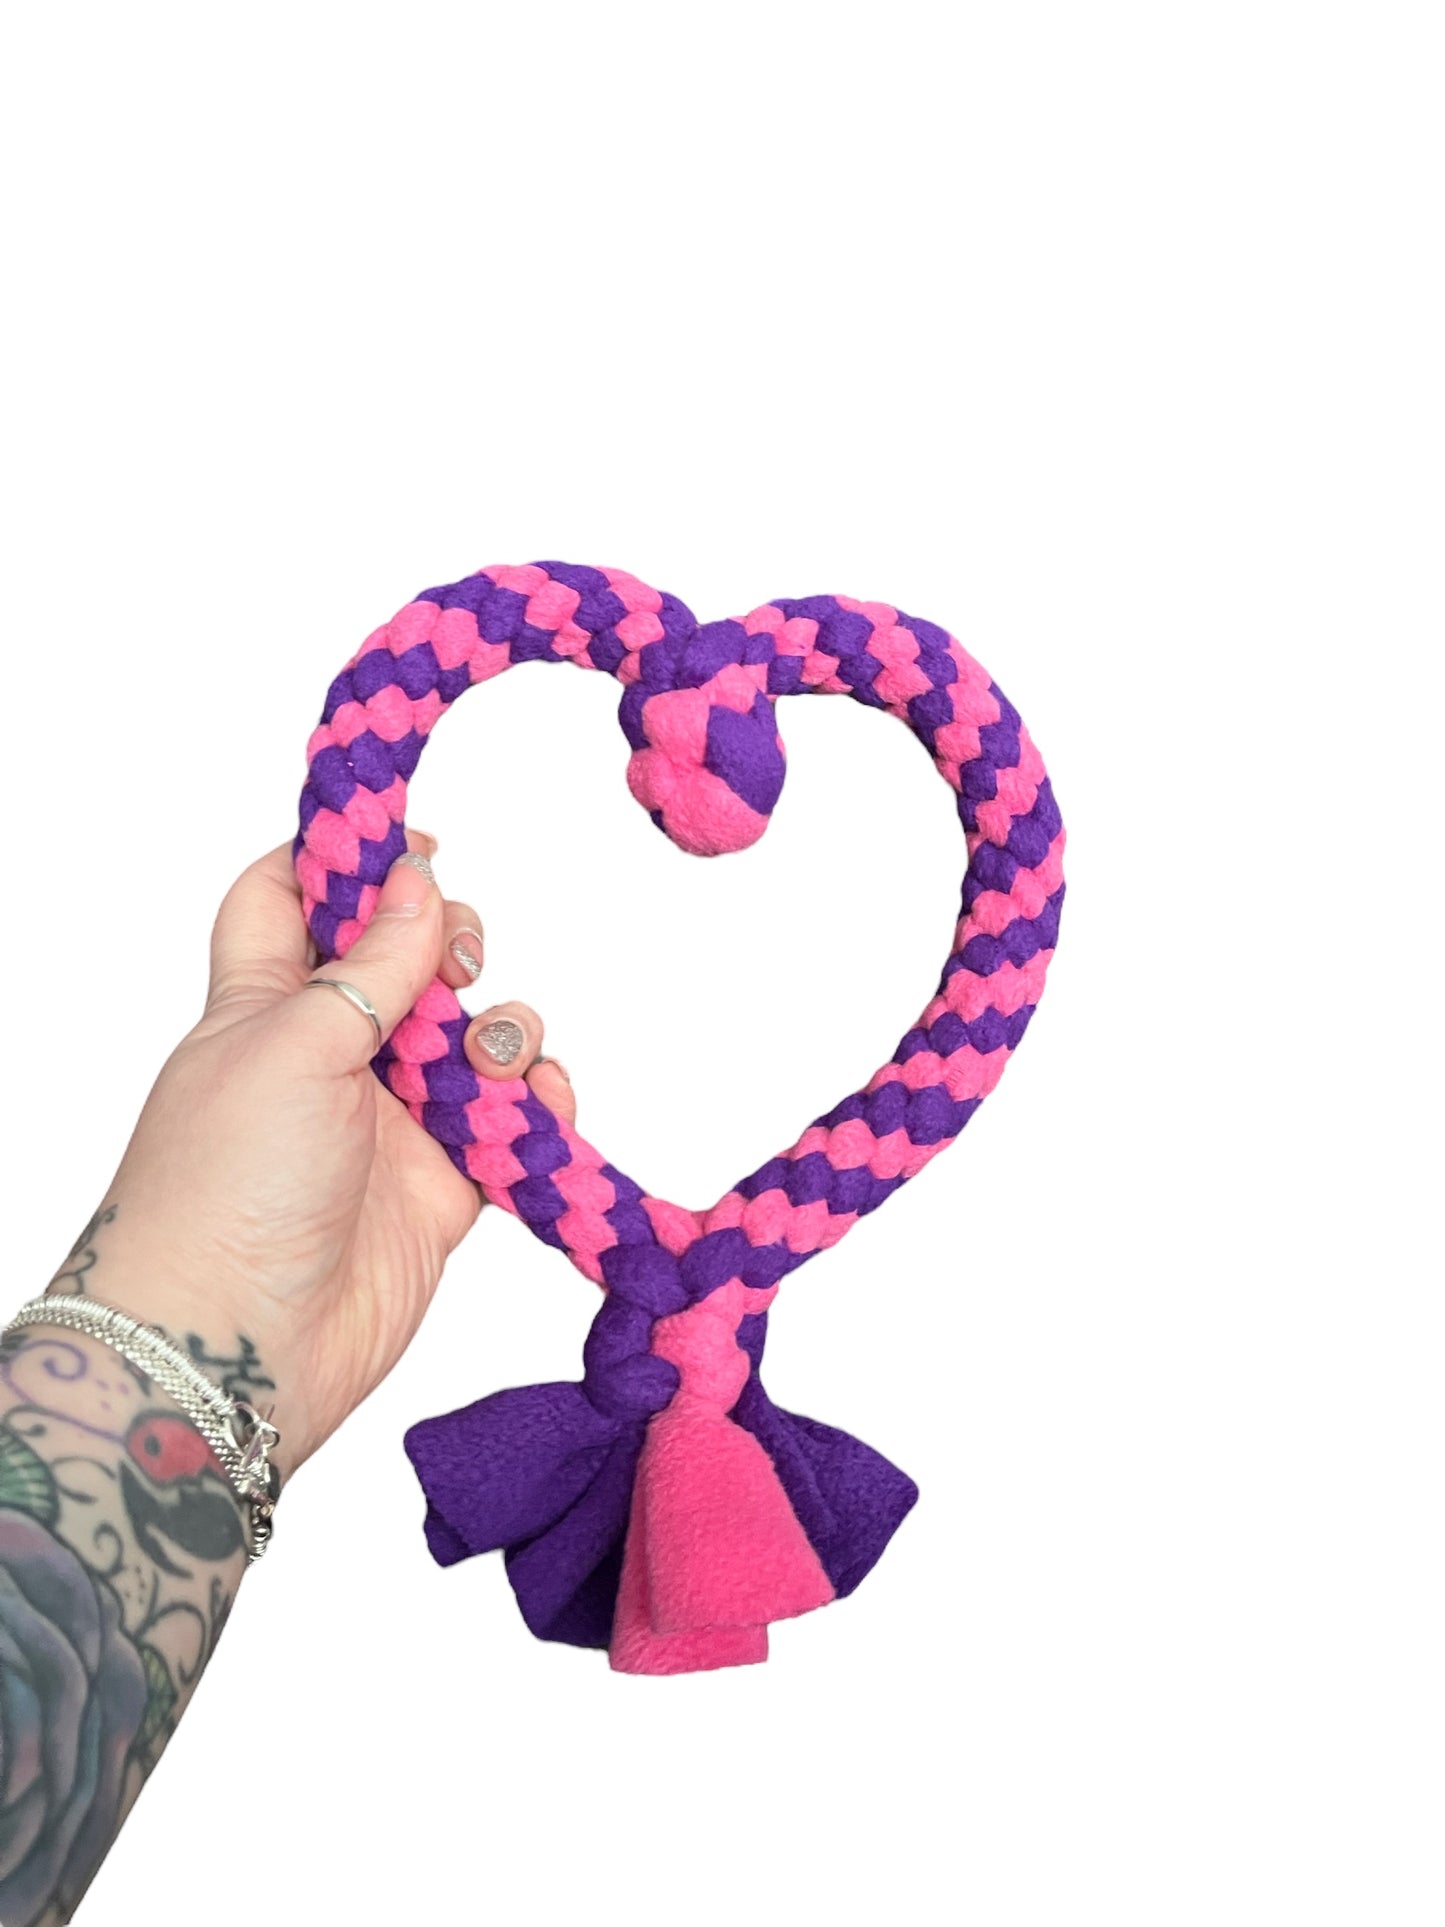 Heart shaped hand made tug toy create your own dog toy